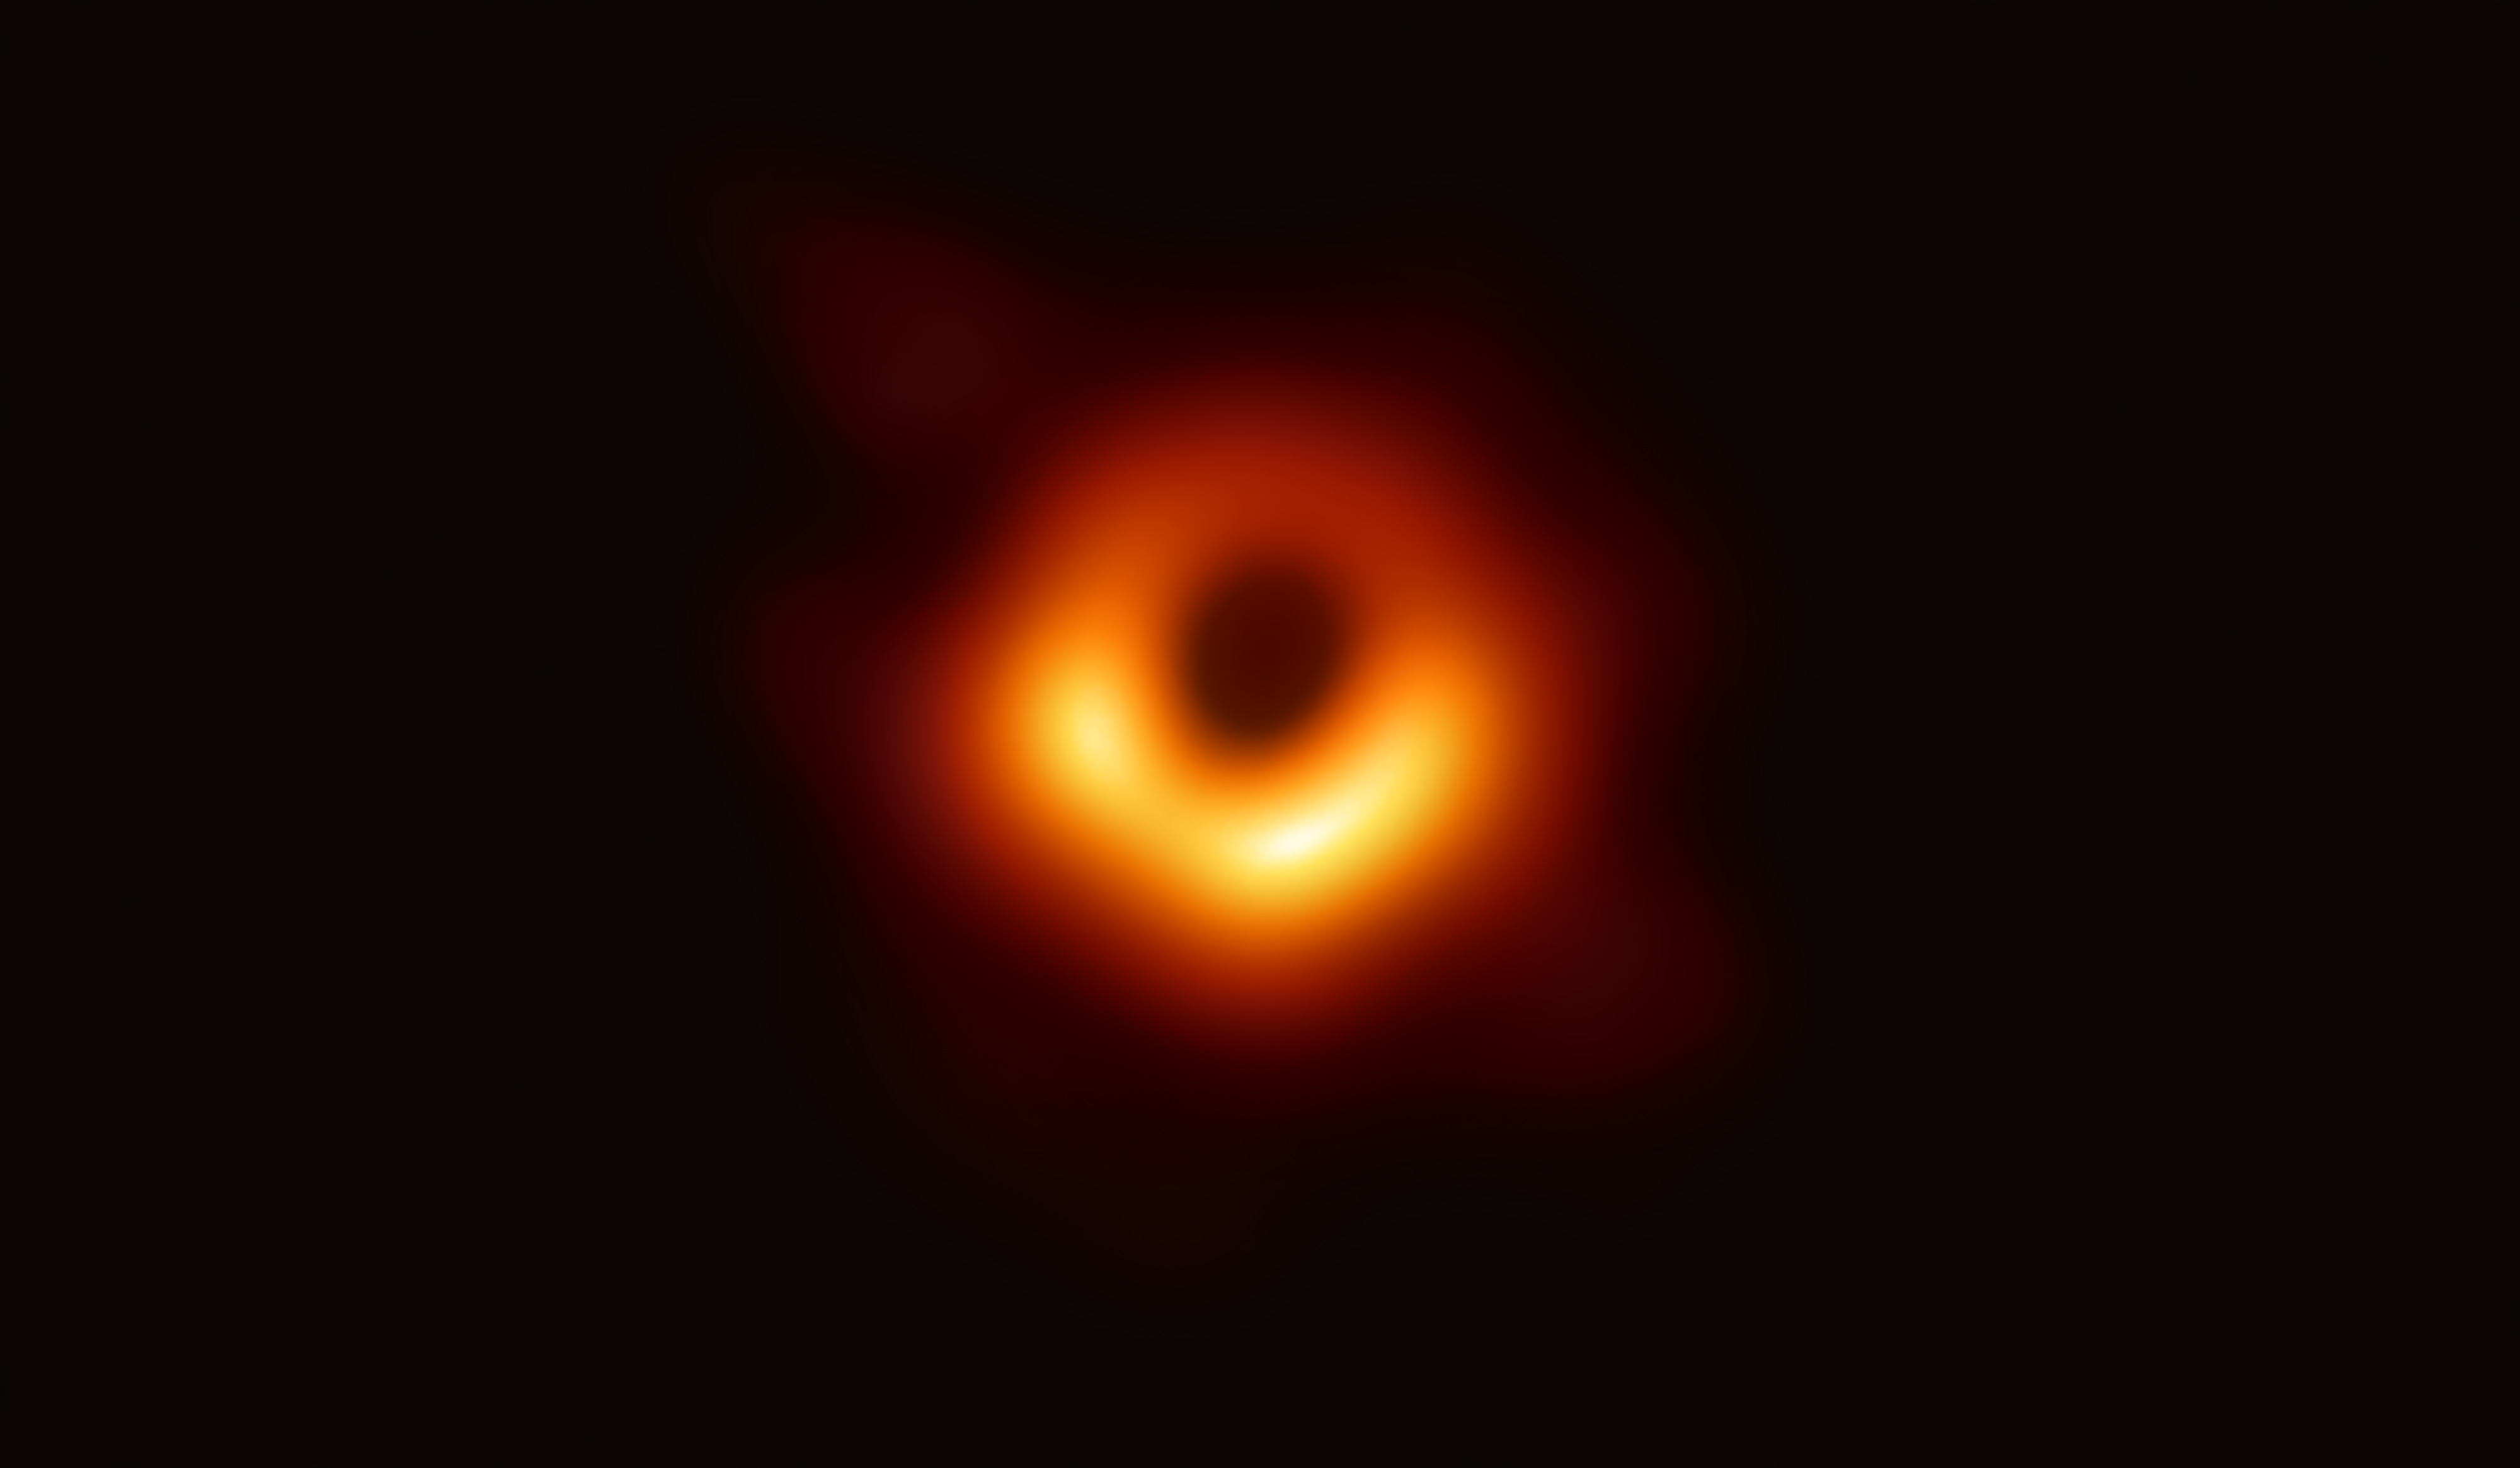 0 First image of shadow of black hole event horizon sphere - 2019